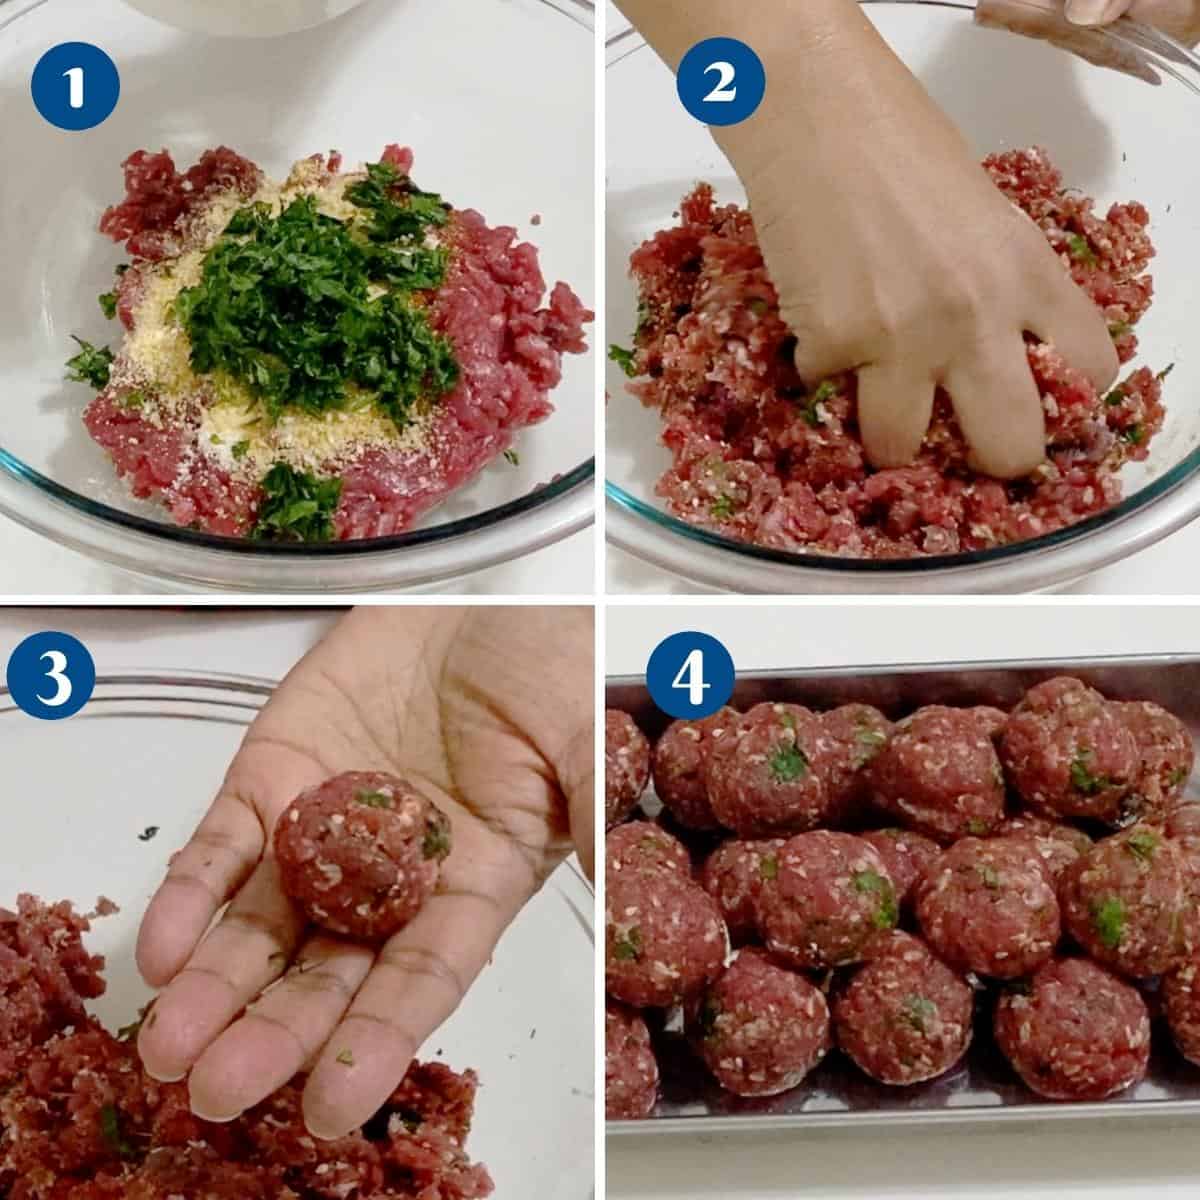 Progress pictures collage making the meatball kofta.